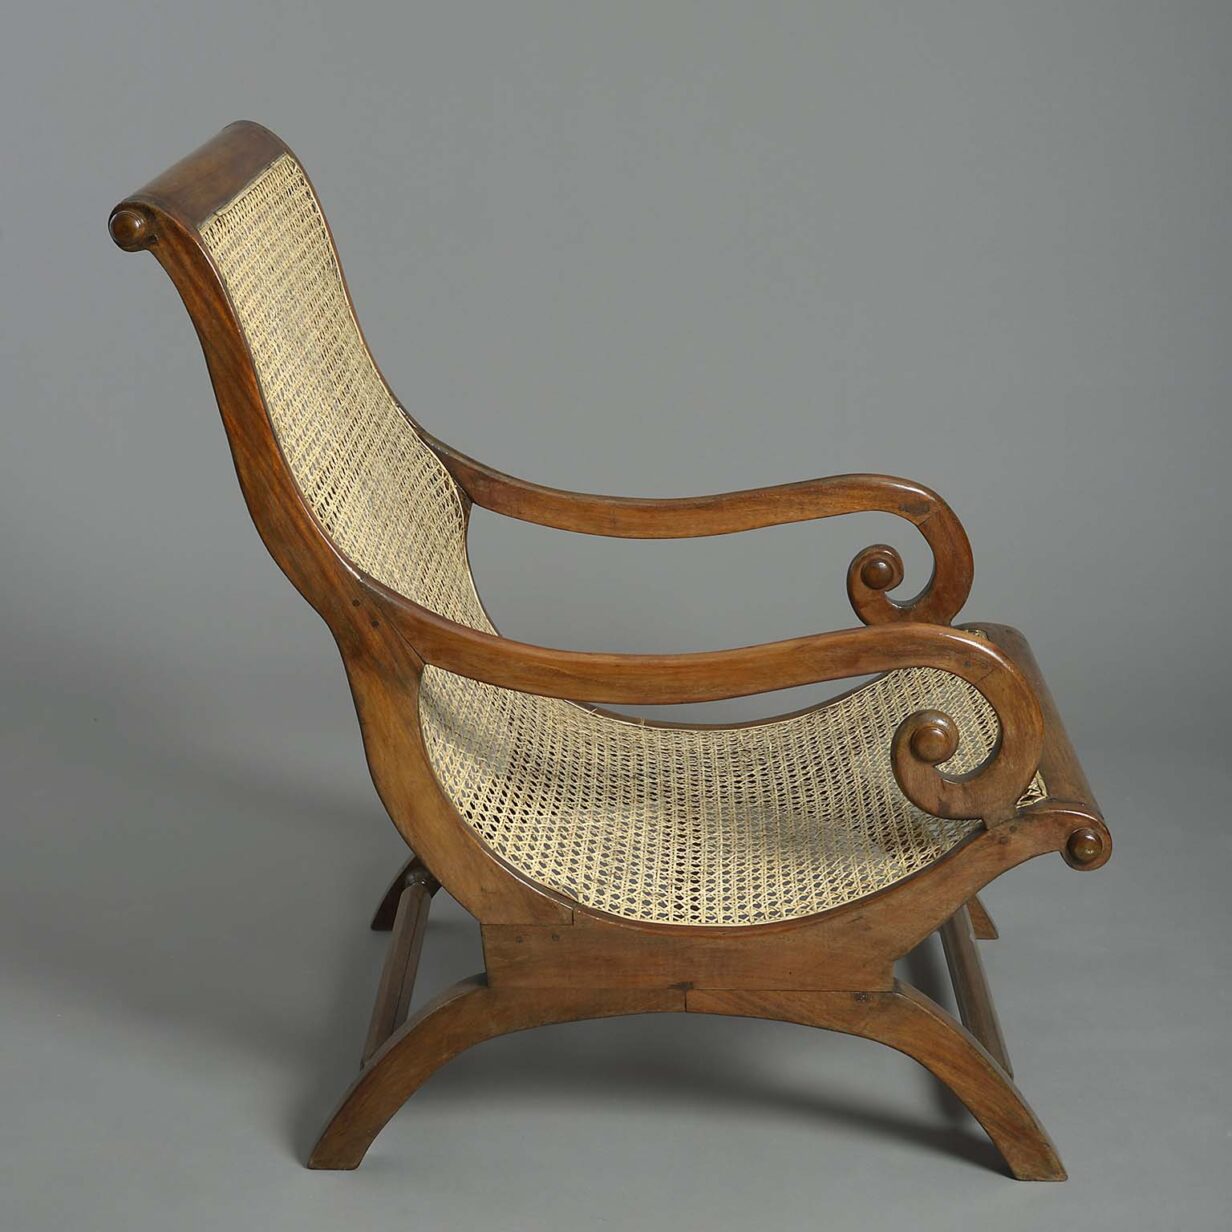 Early 19th century planter's chair